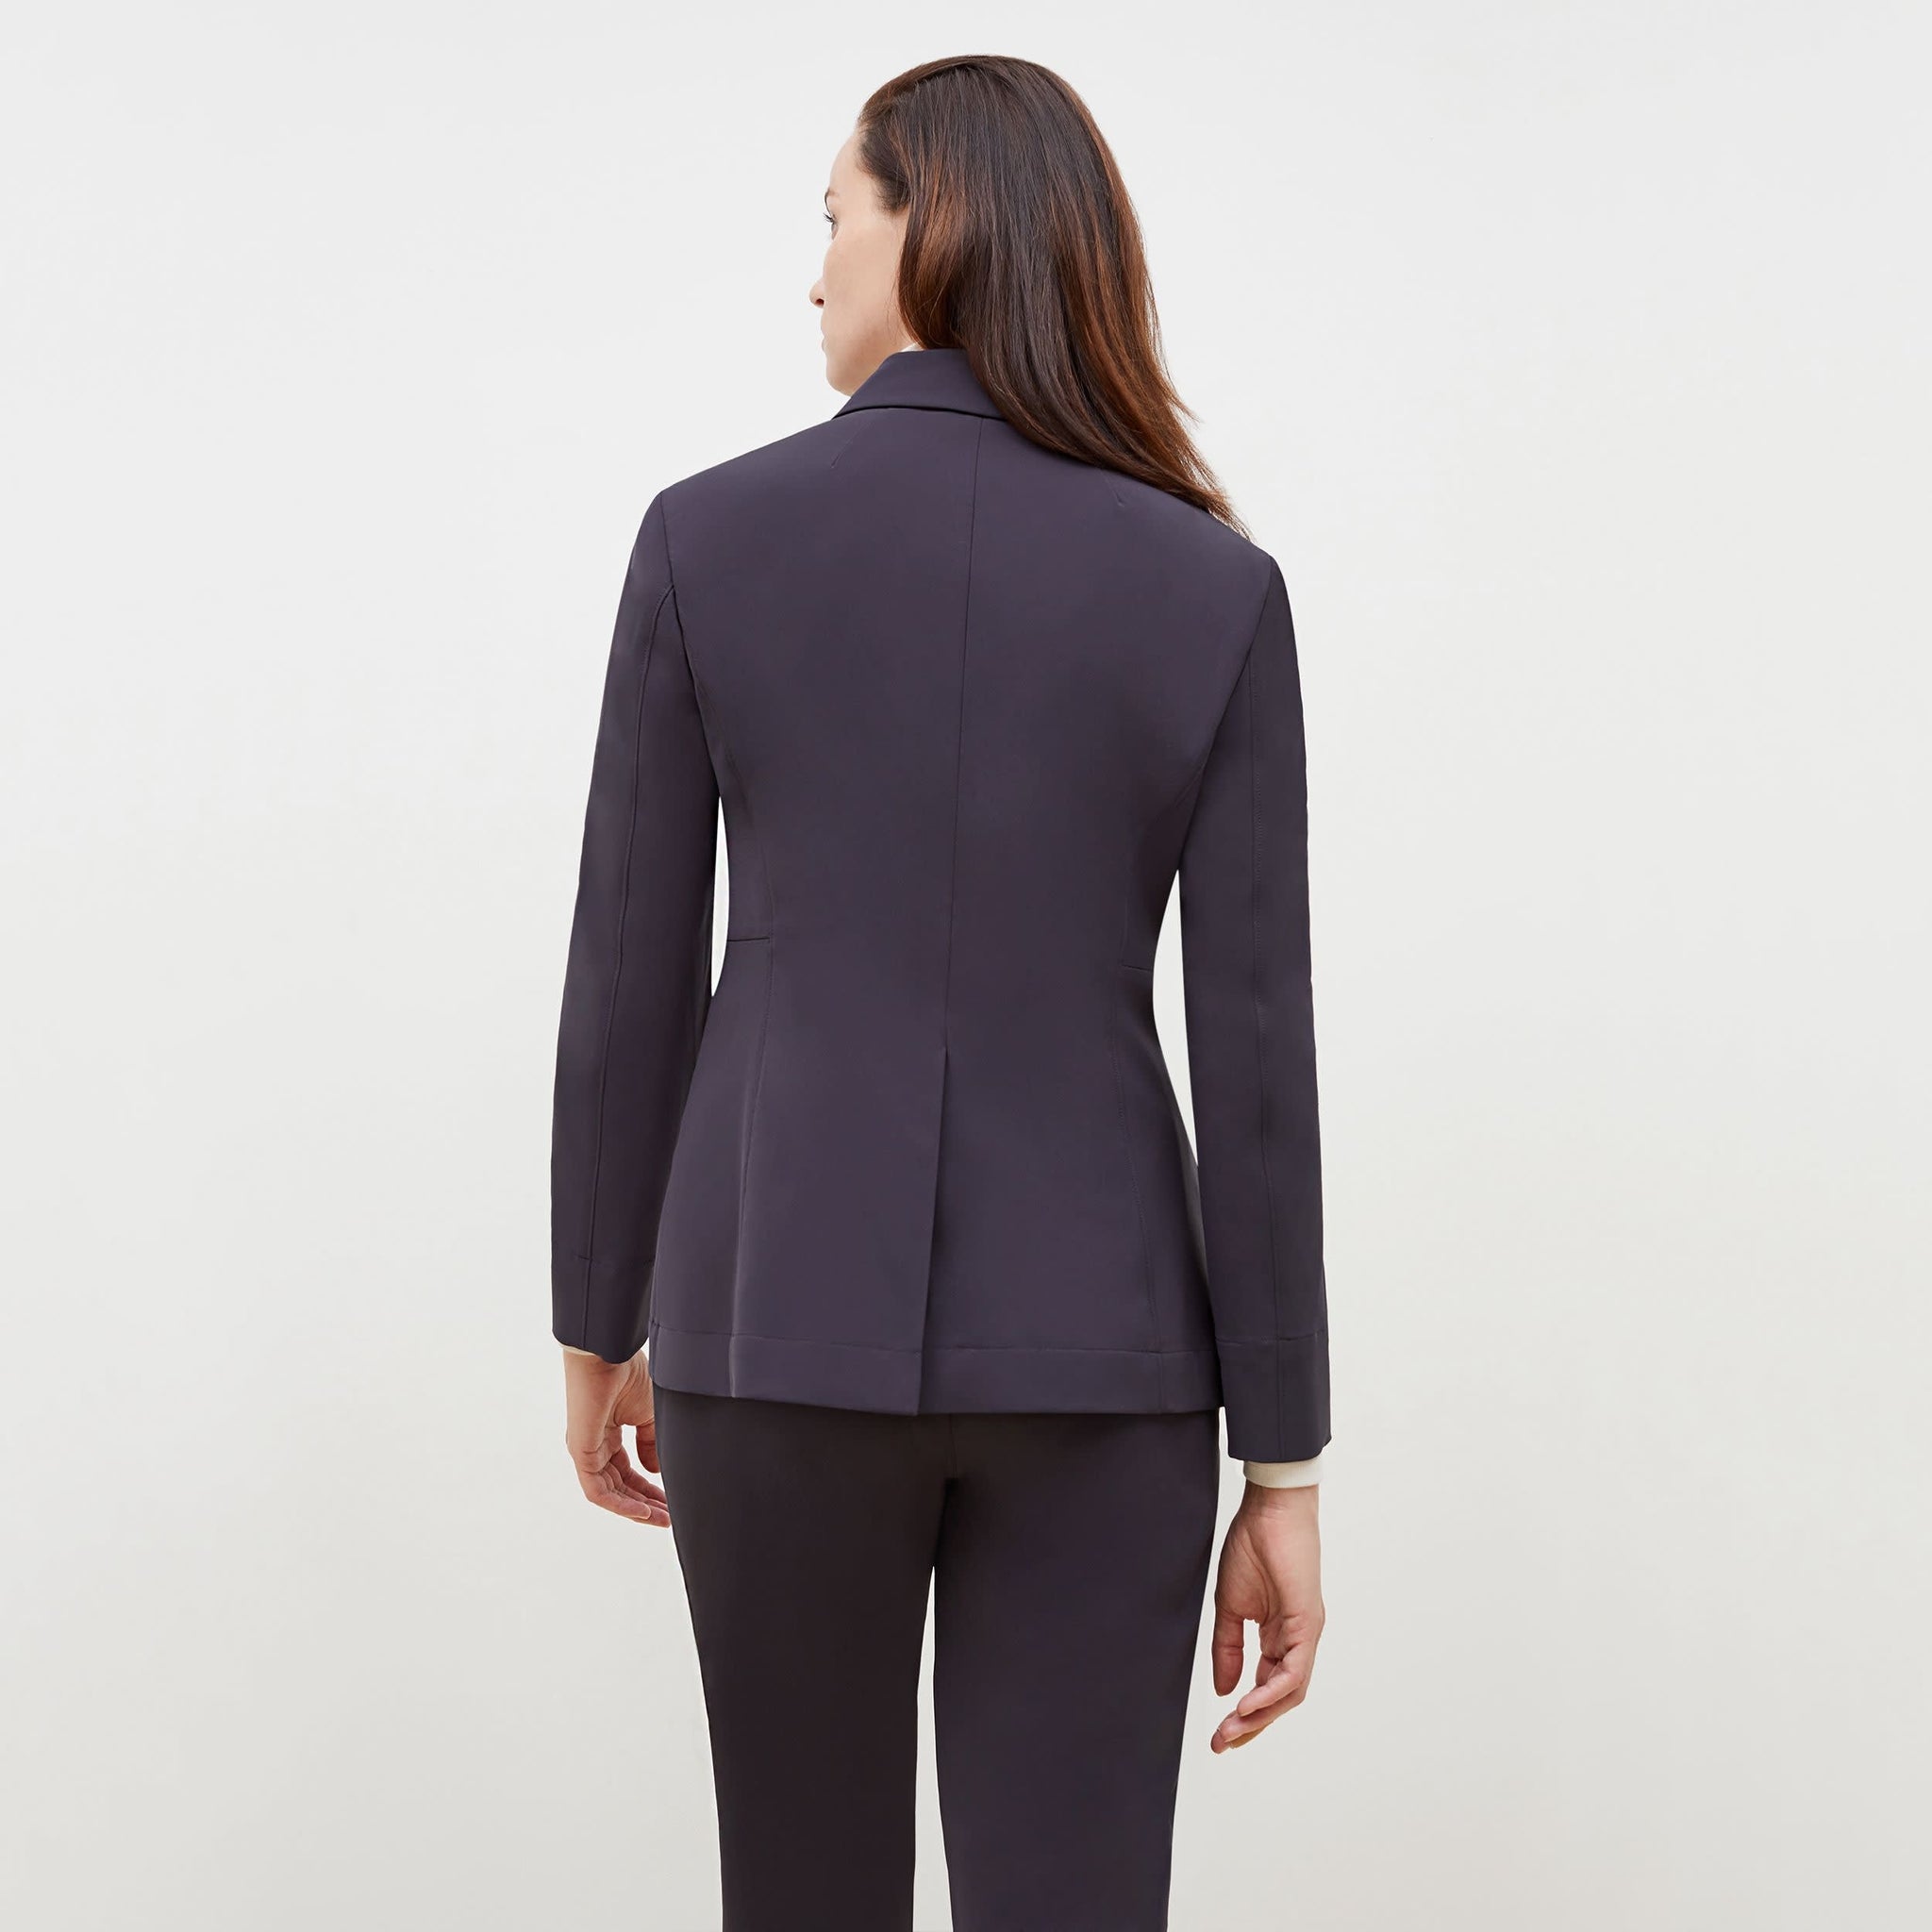 Back image of a woman standing wearing the Moreland Jacket—Origami Suiting in Cool Charcoal